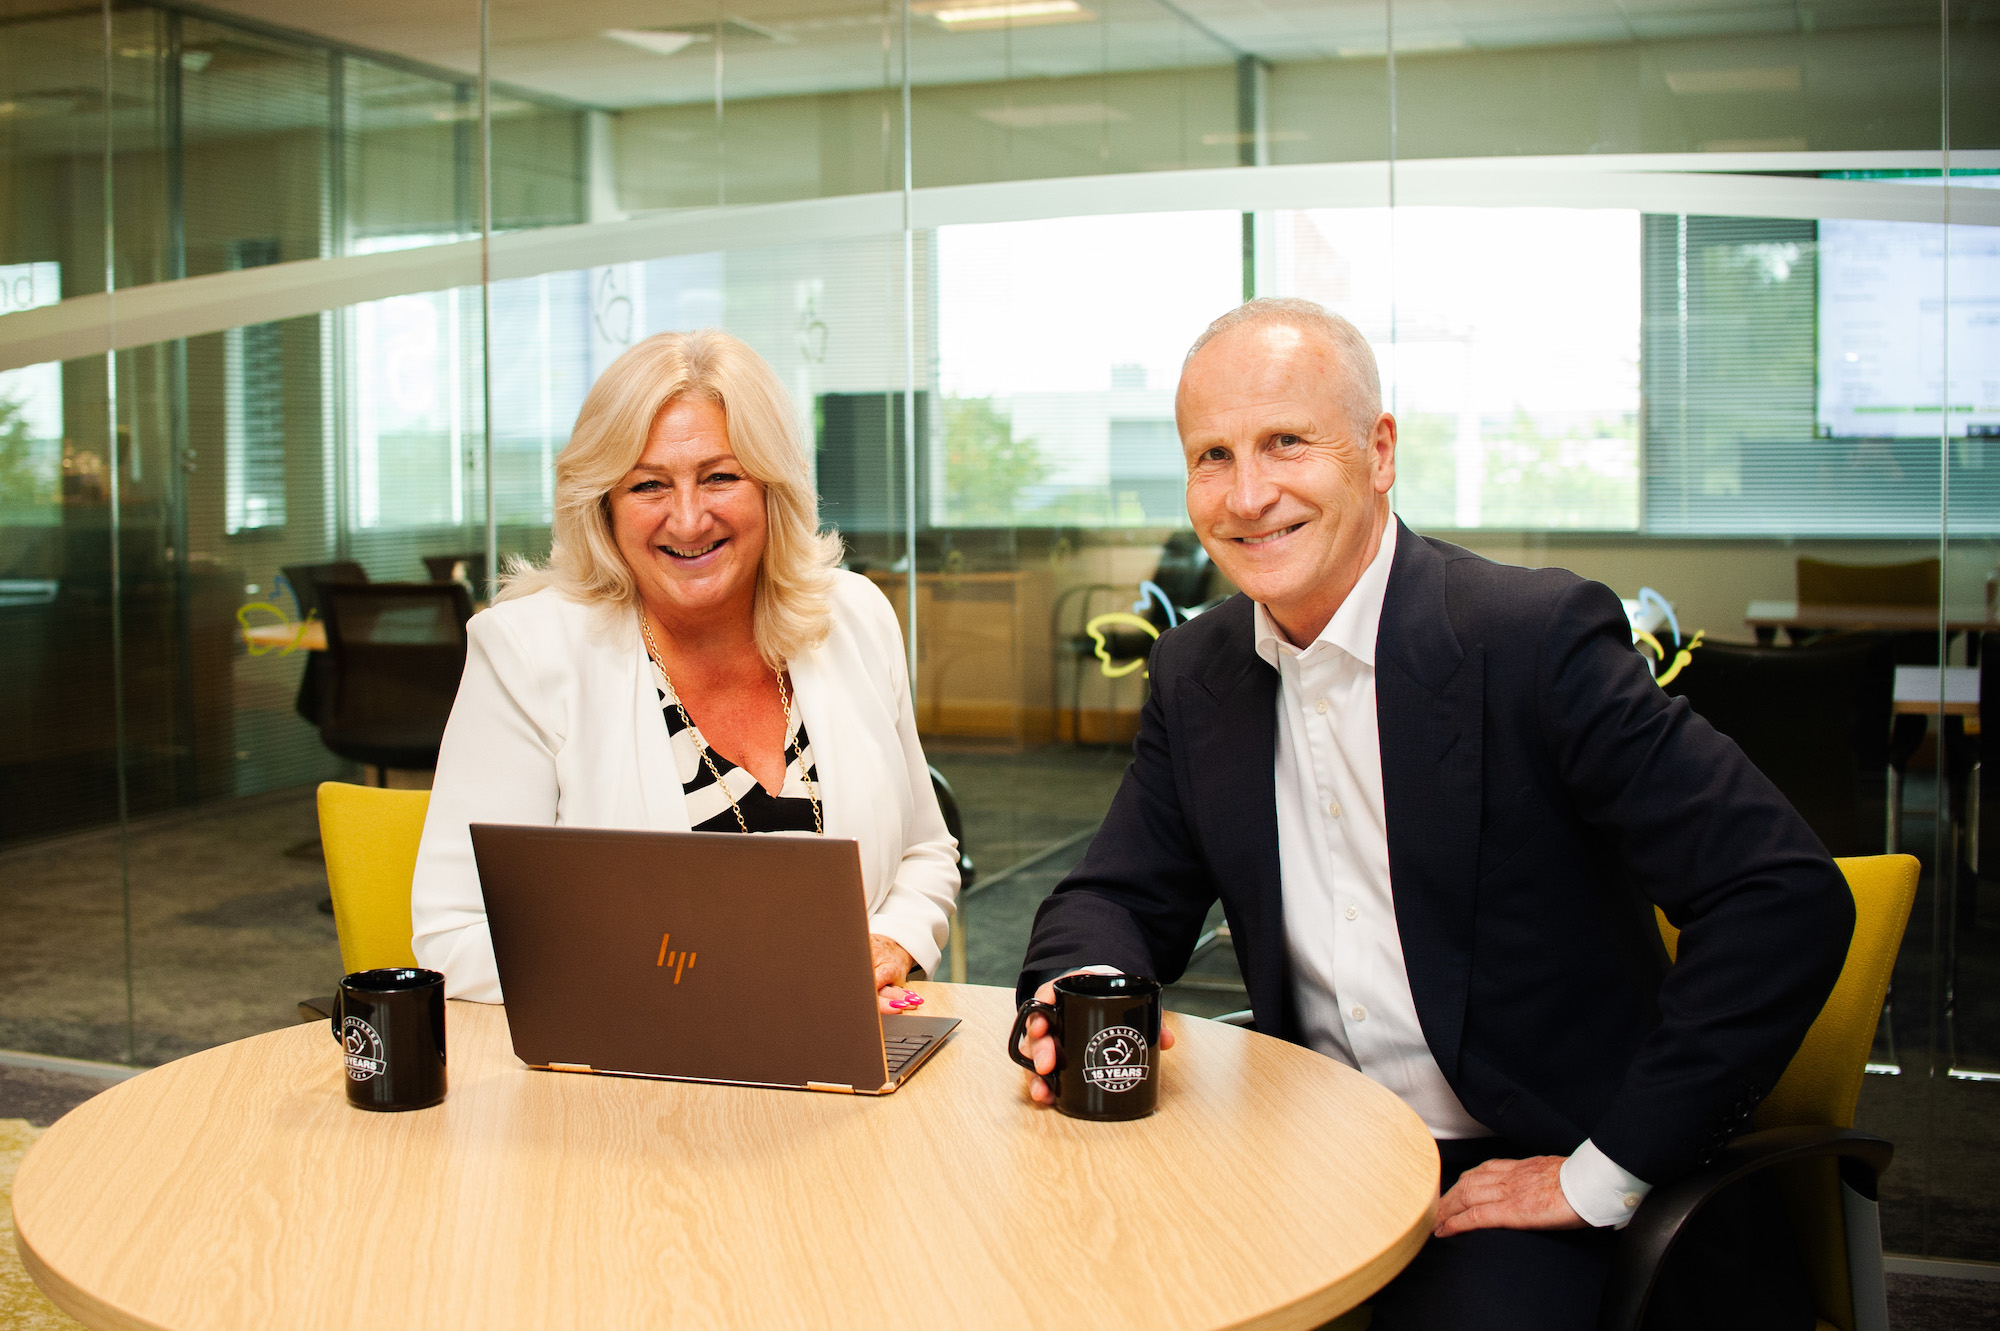 Age Partnership customers to benefit from Biscuit Tin 'digital vaults'